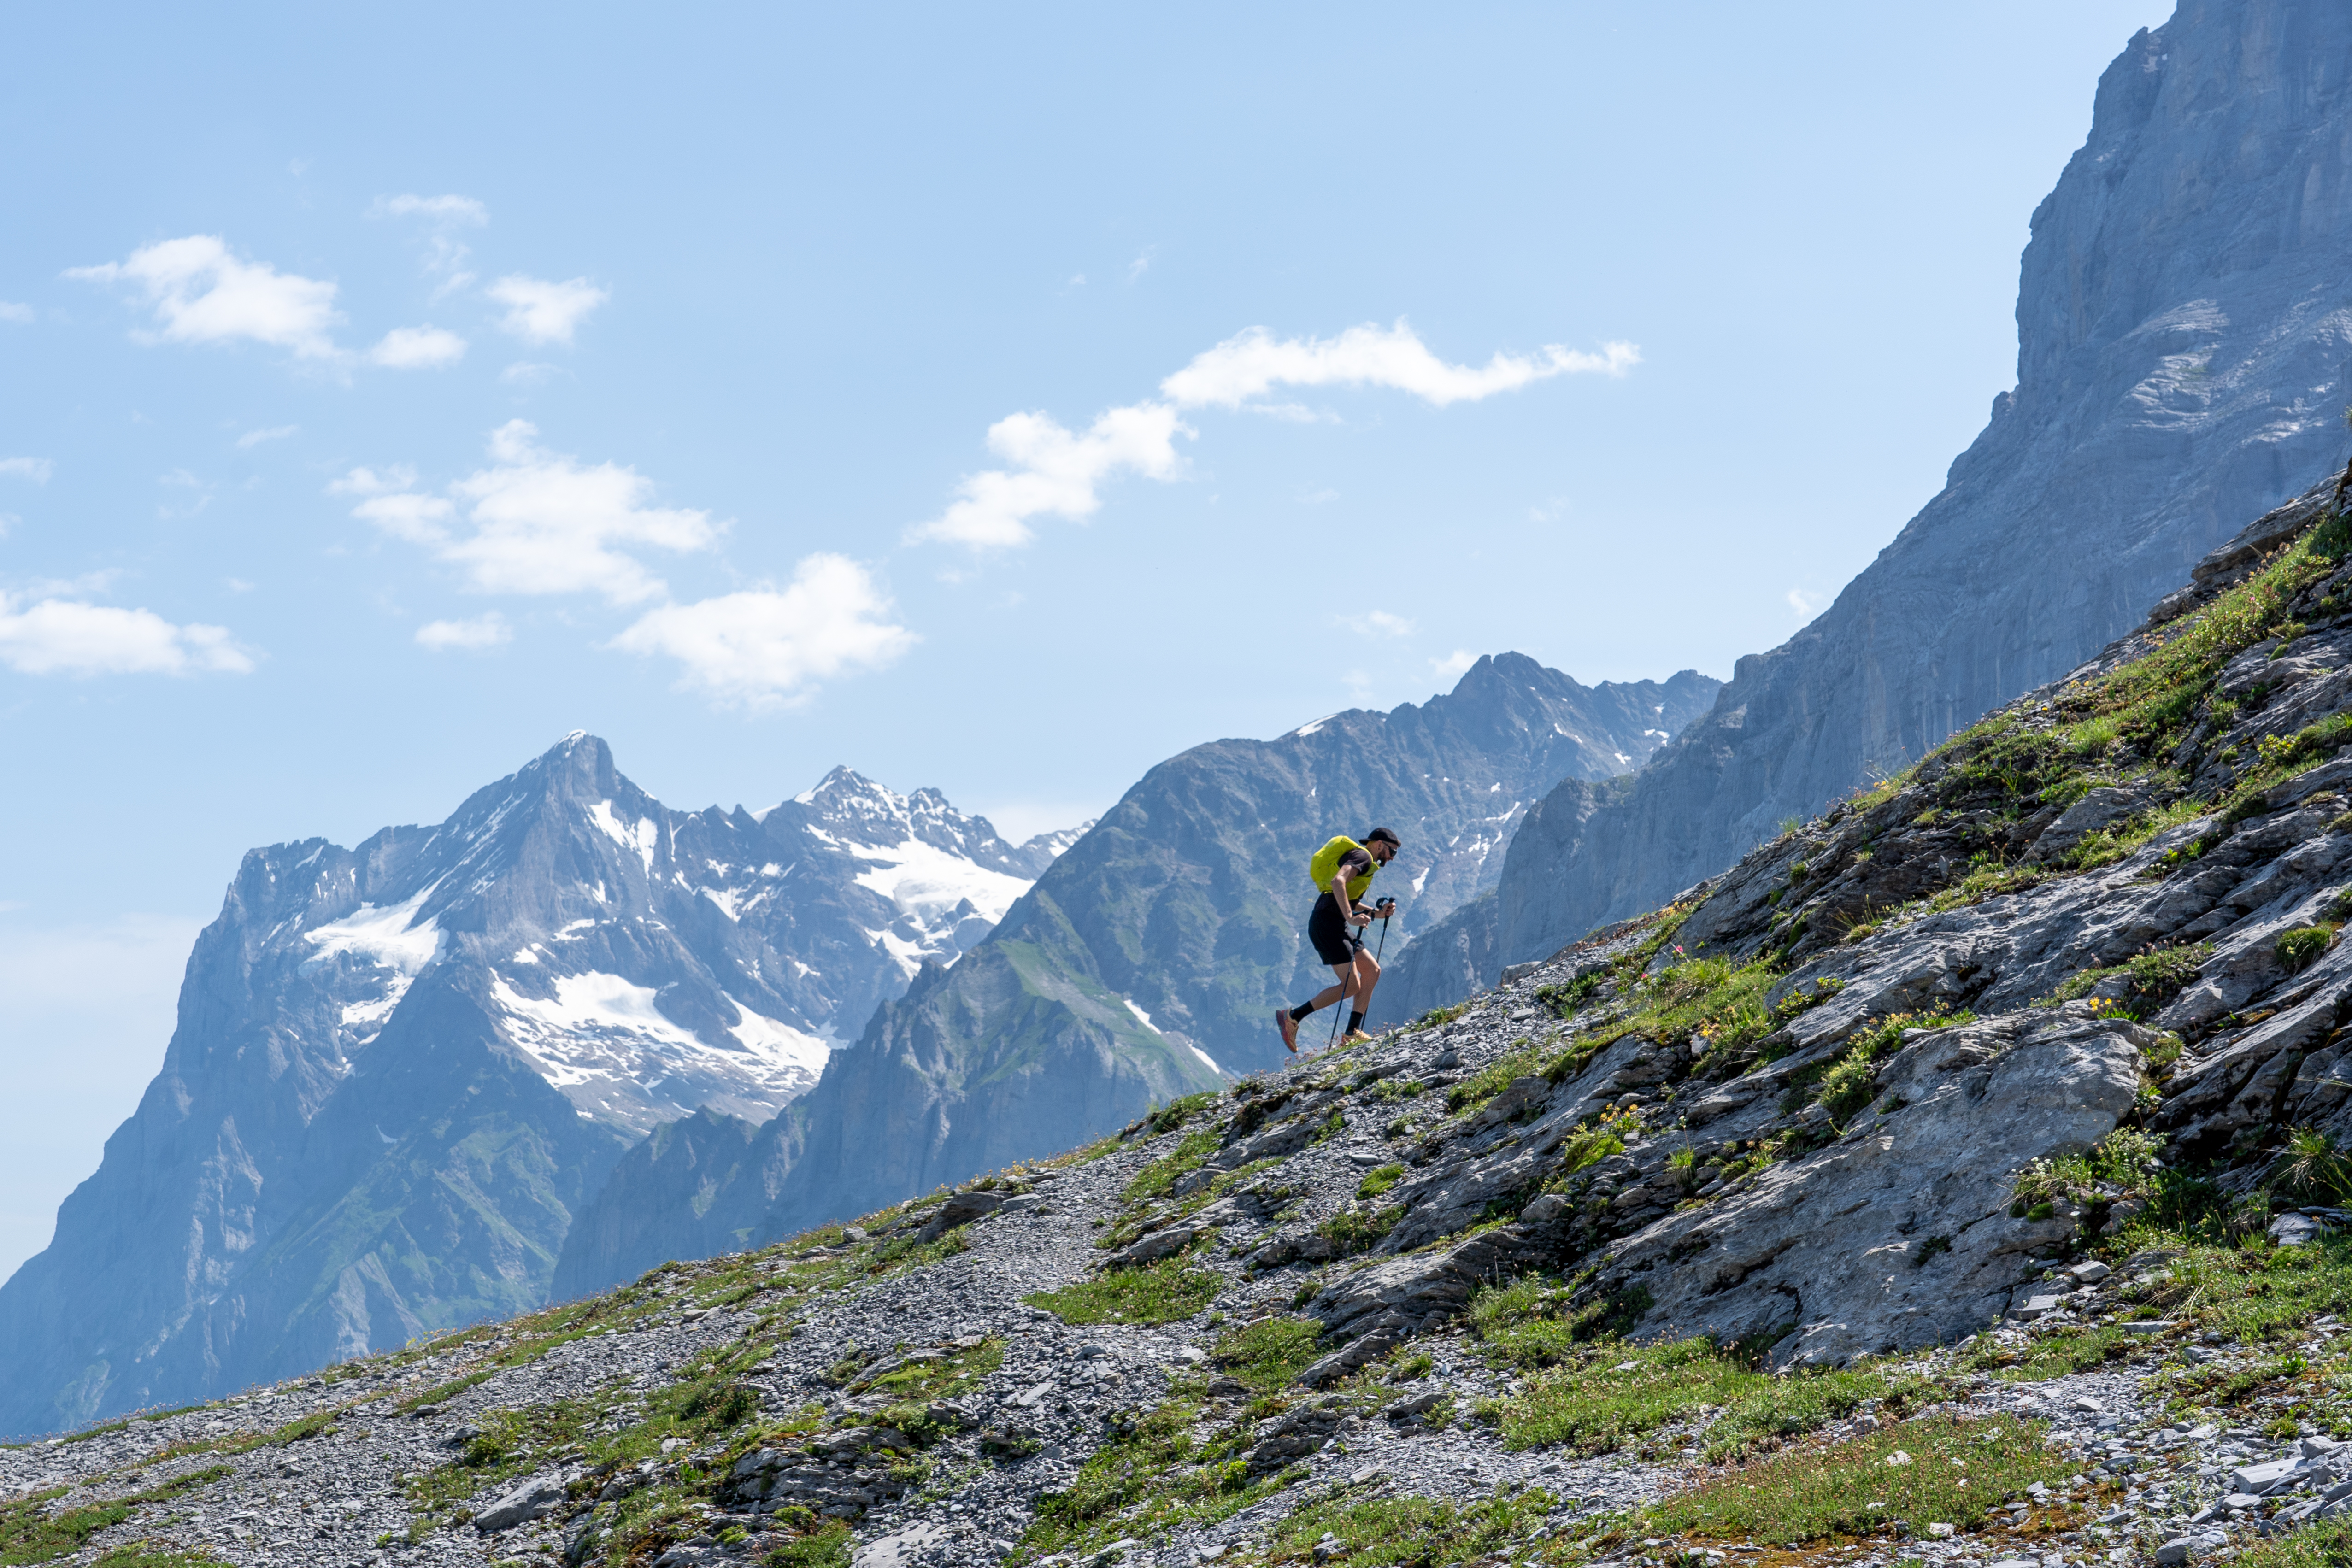 Jake Catterall running along the side of a mountain in Switzerland